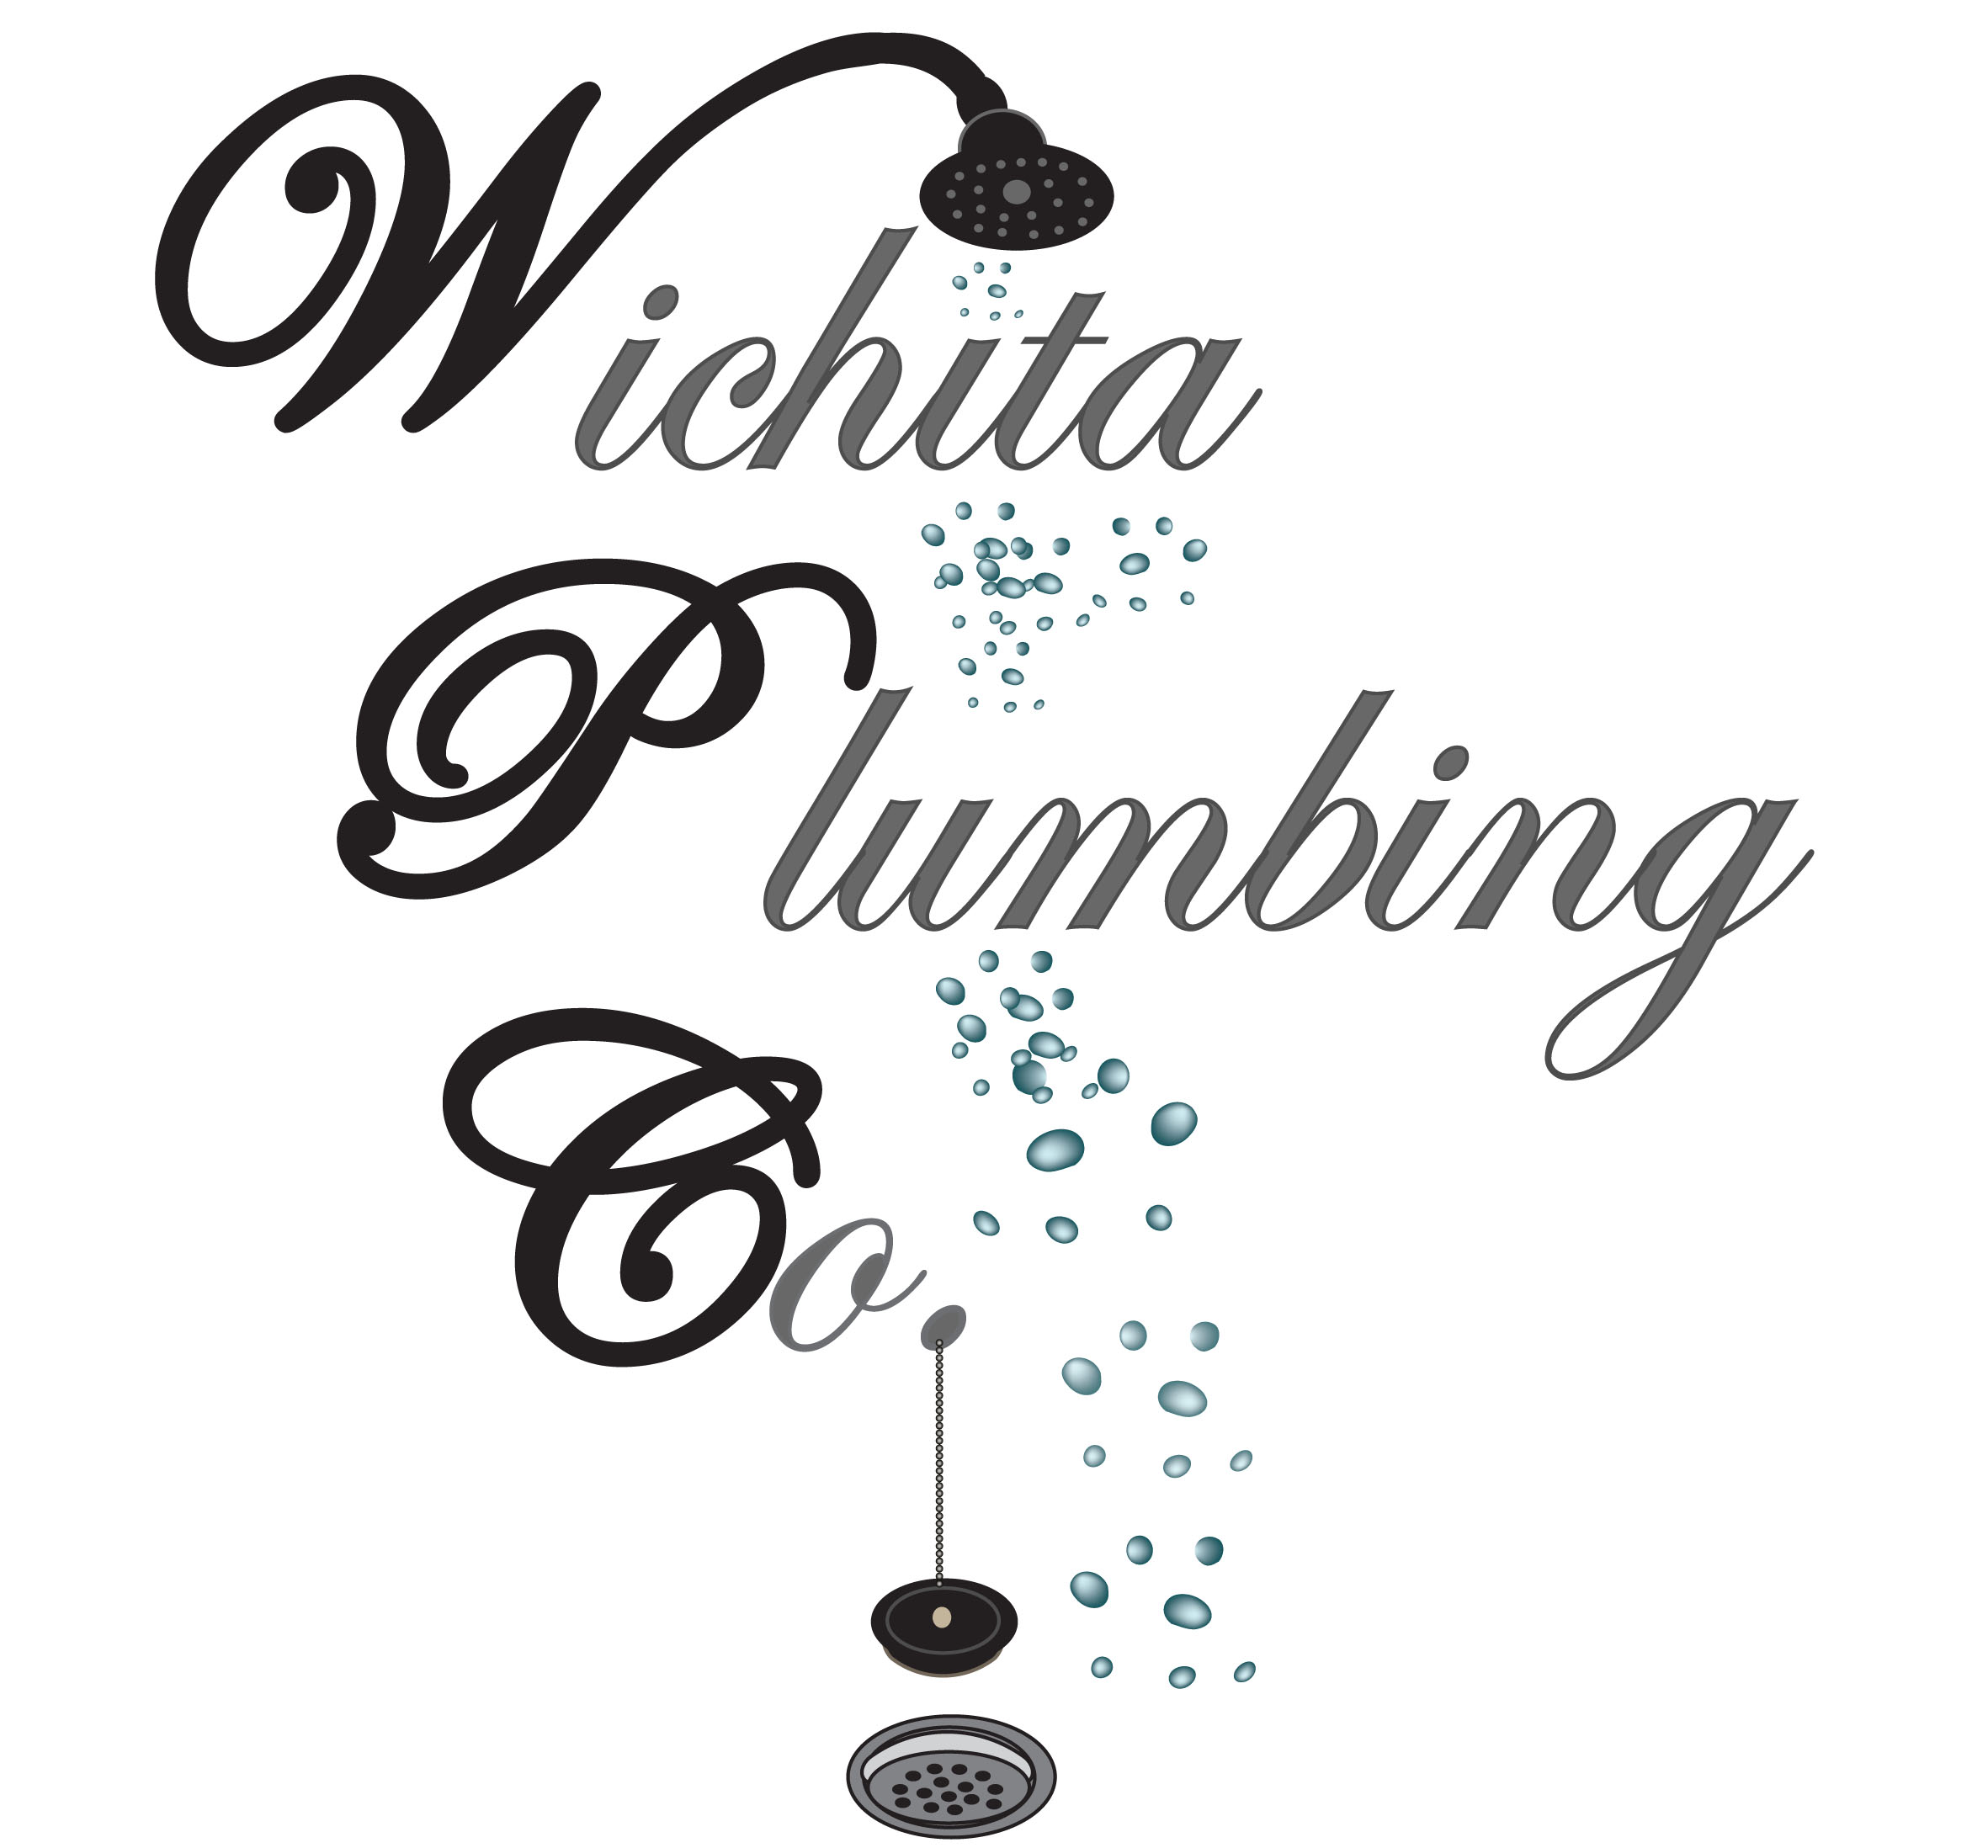 wichita plumbing company 24 hour hr emergency plumbing service hot water tanks clogged drains toilet water lines services ks kansas